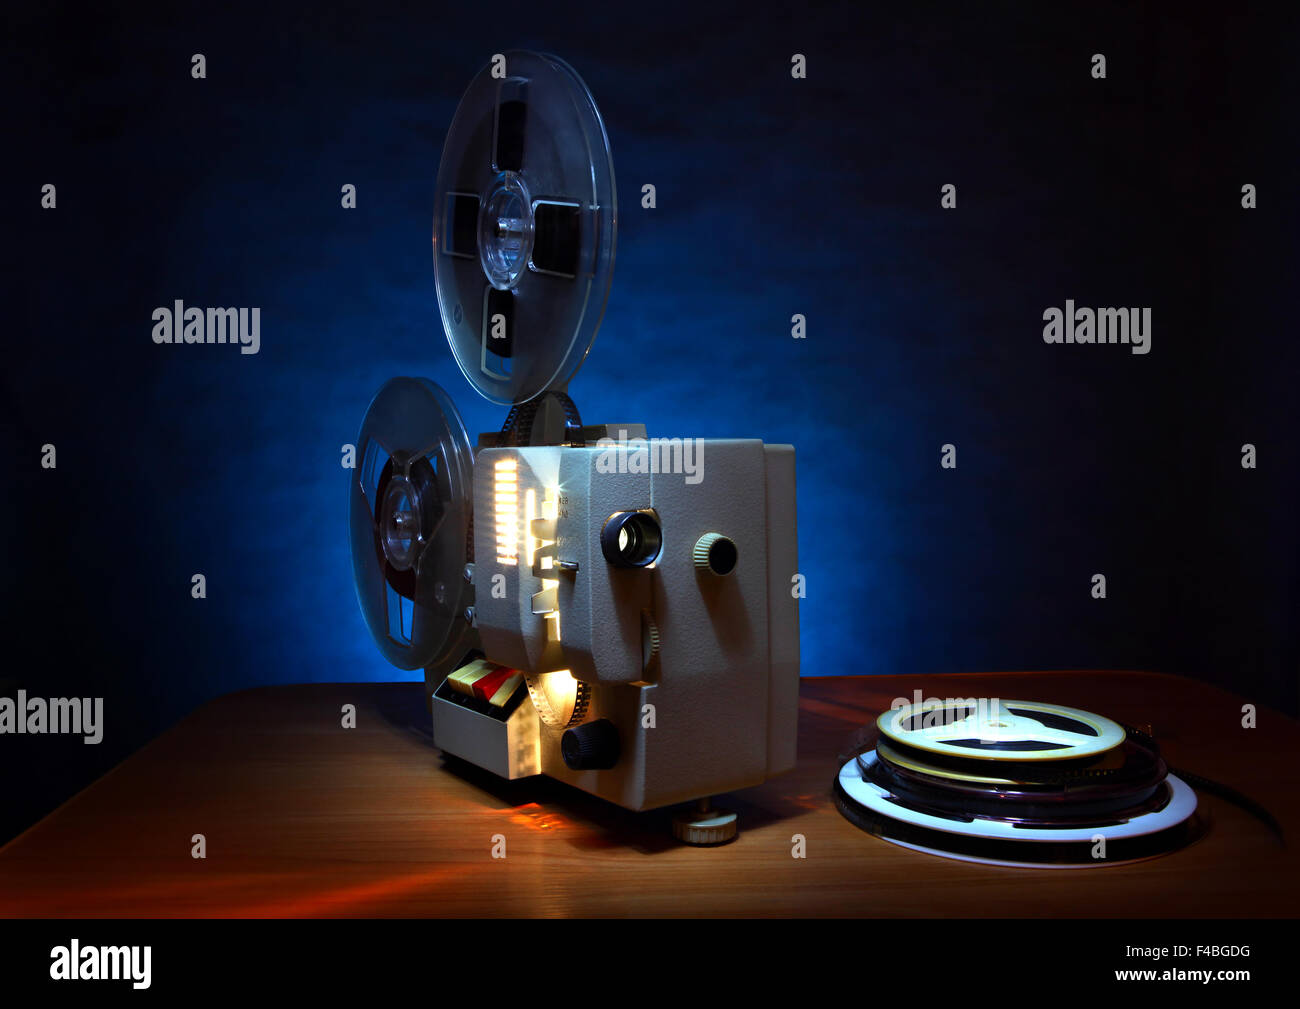 Original old big movie reel for 35 mm cinema projector loaded with film in  vintage color effect on neutral background Stock Photo - Alamy